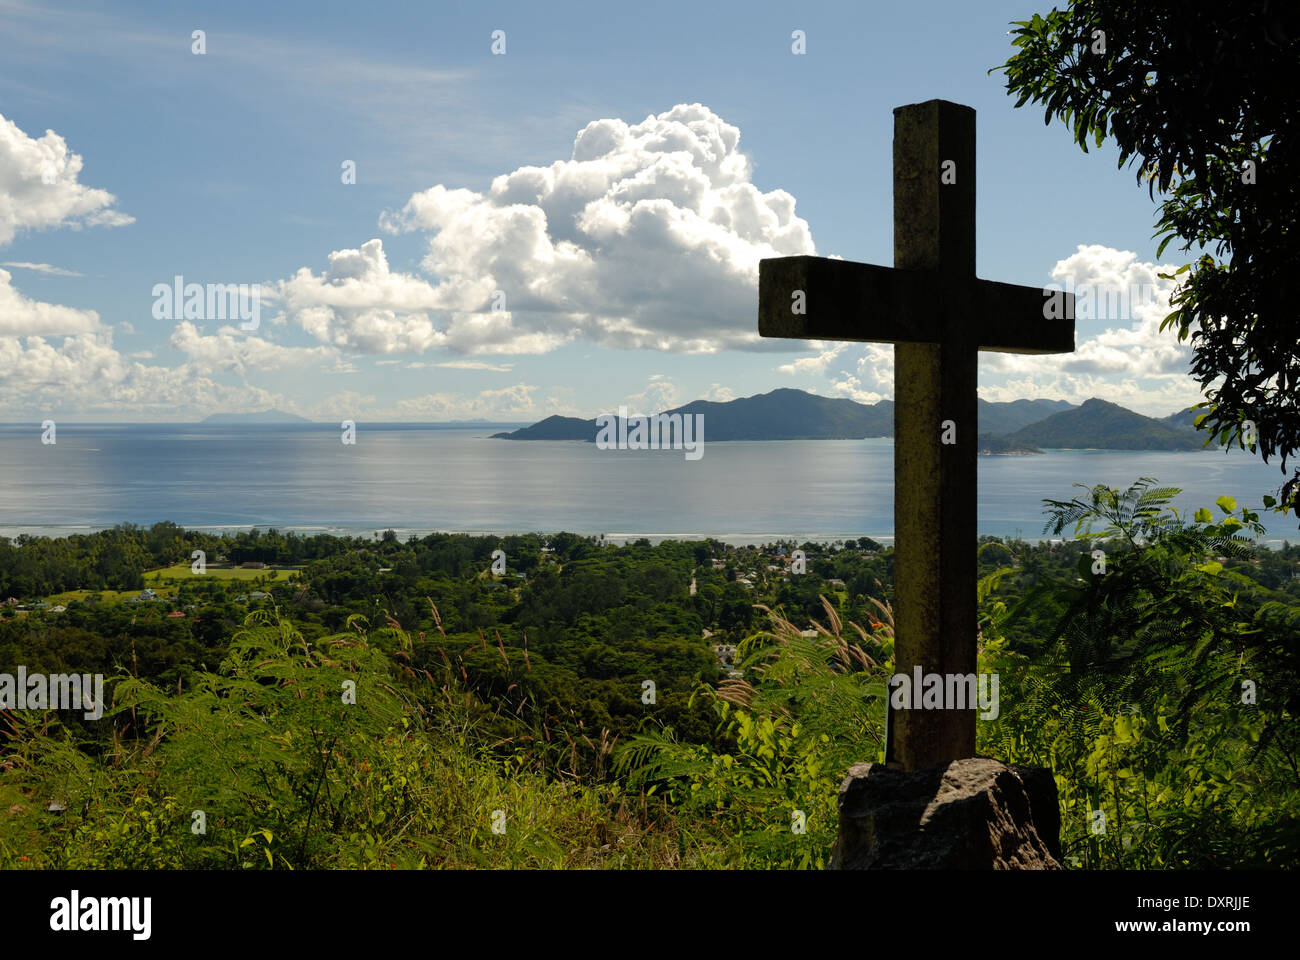 View from Belle Vue with Cross in Foreground and Clouds and Islands in Distance Stock Photo